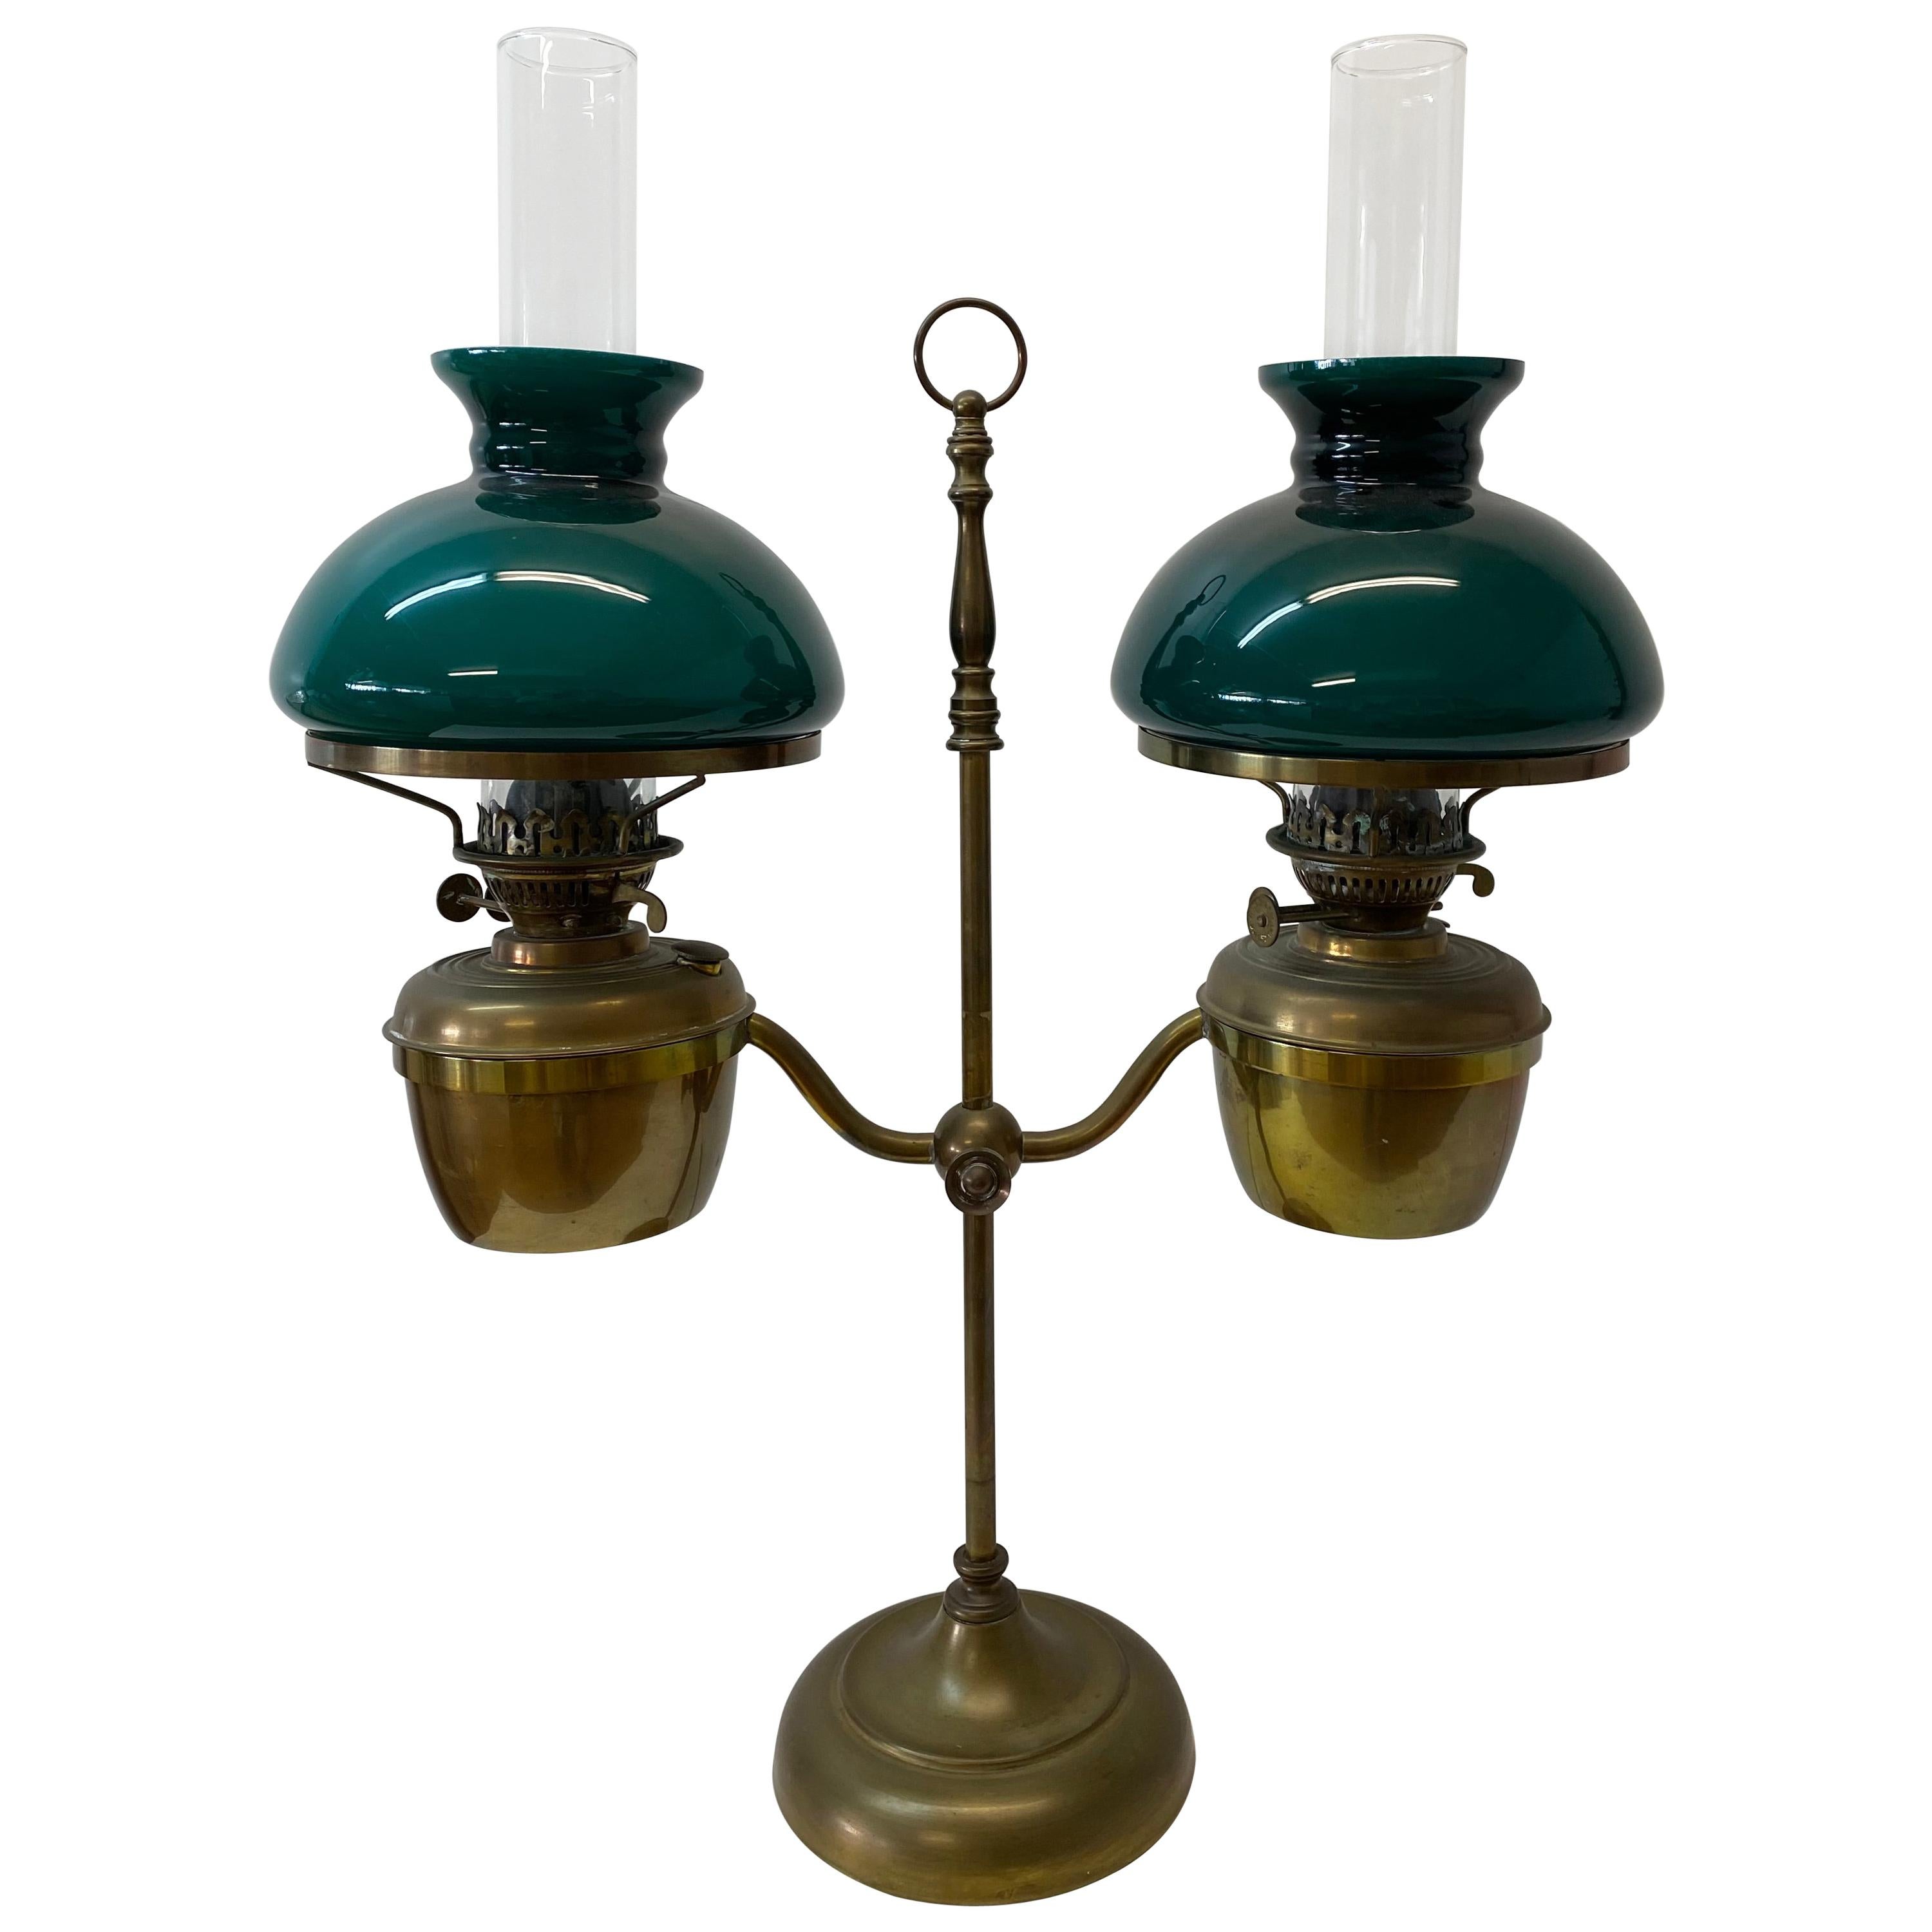 Duplex, England "Double Student" Victorian Oil Lamp with Green Shades circa 1900